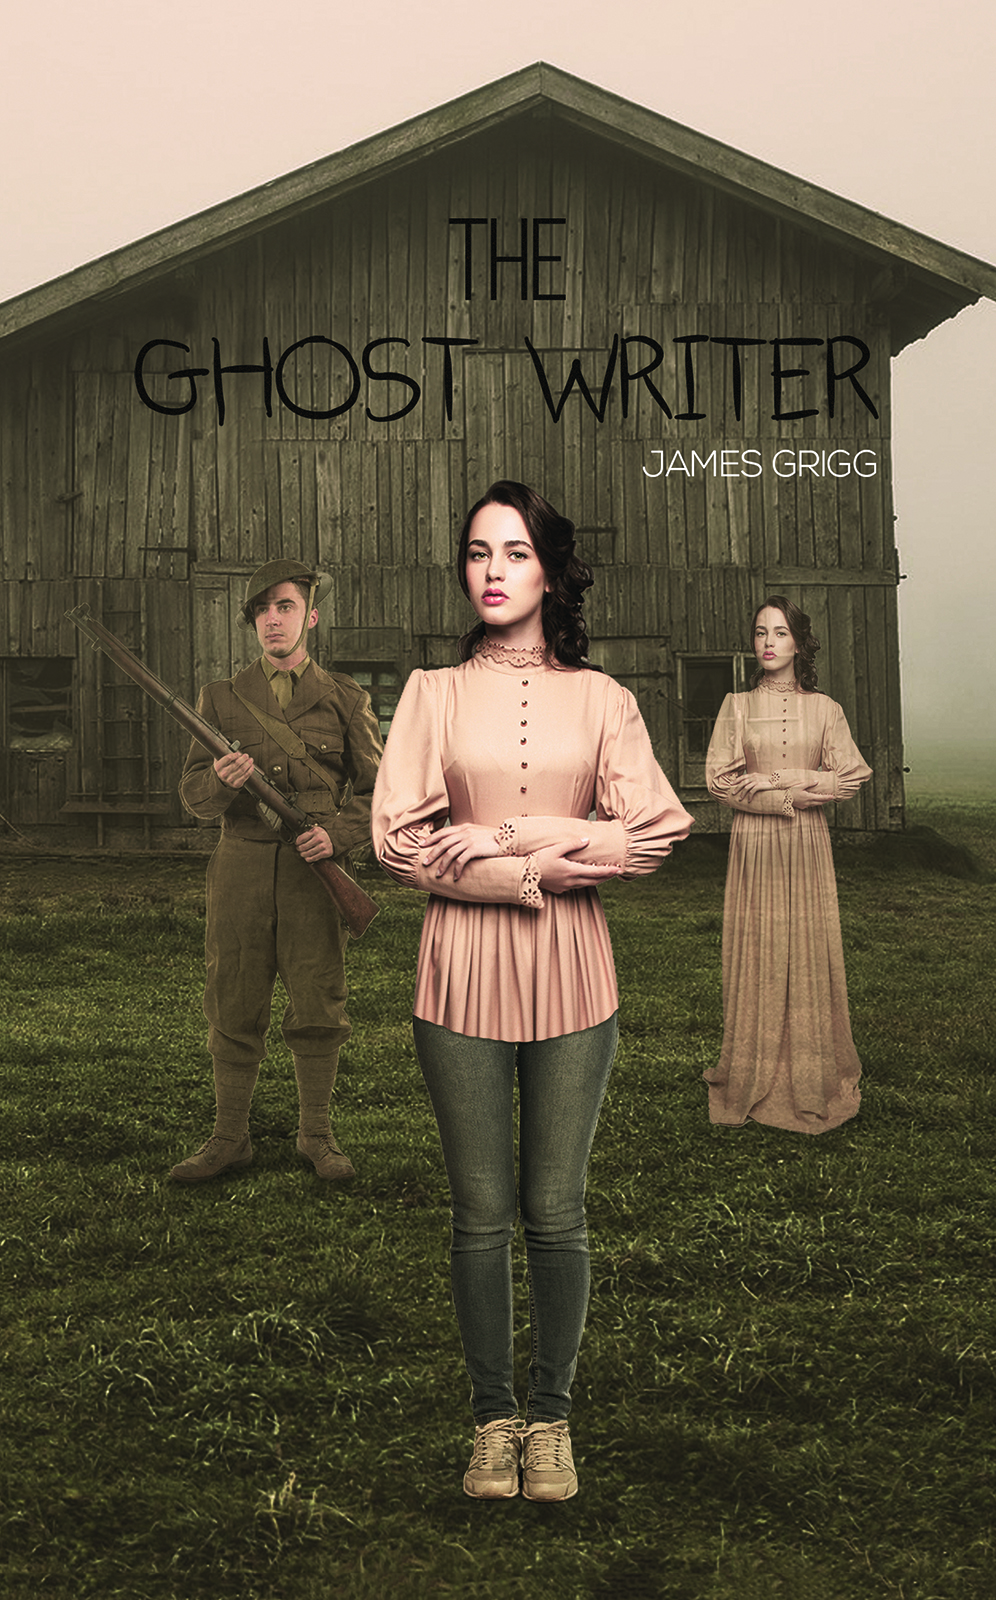 This image is the cover for the book The Ghost Writer